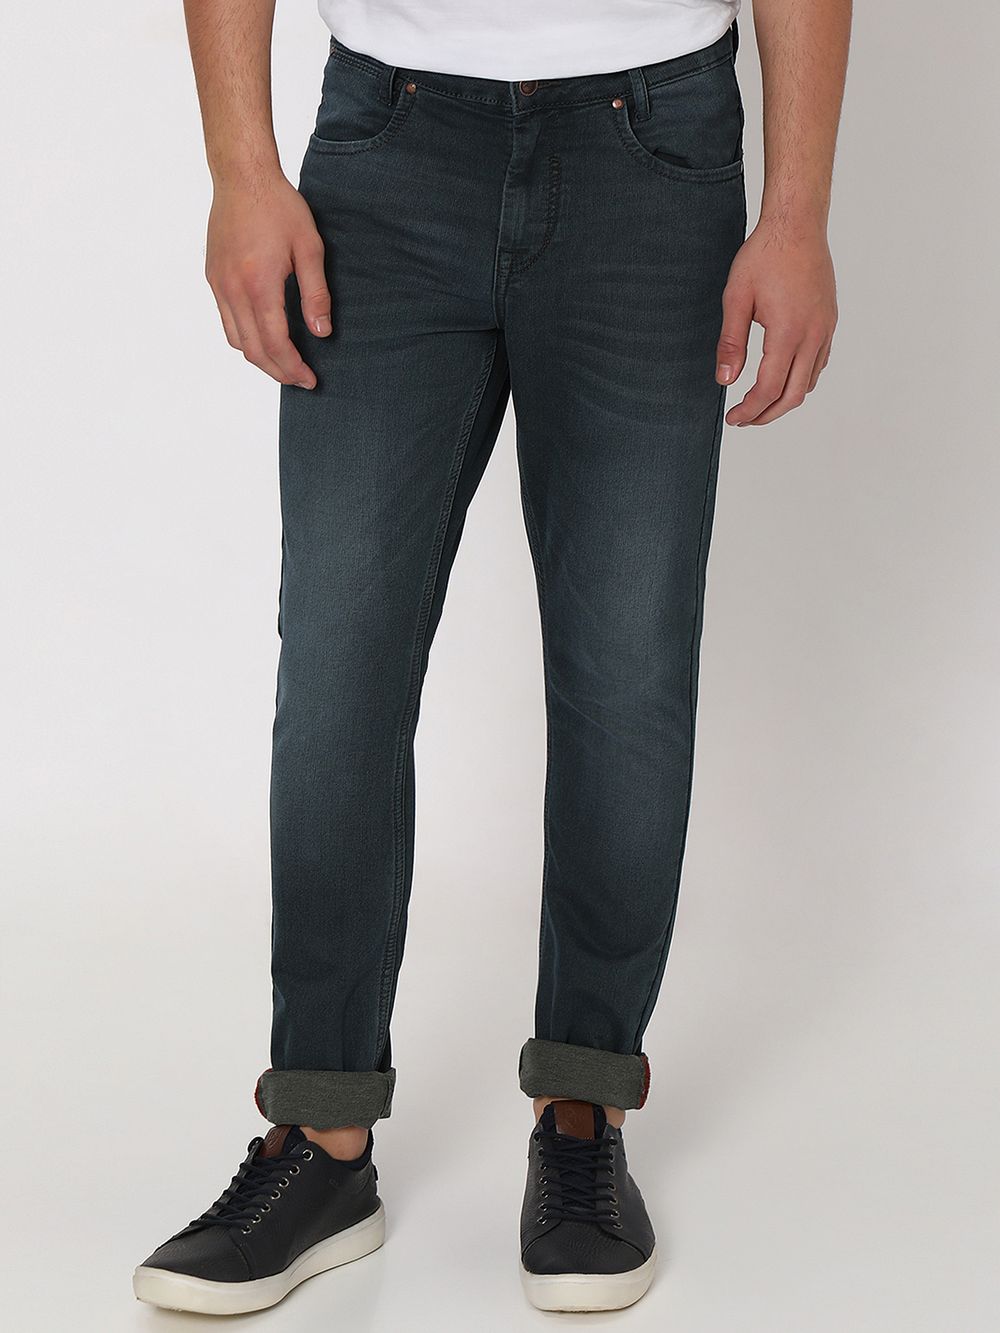 Olive Skinny Fit Denim Deluxe Stretch Jeans